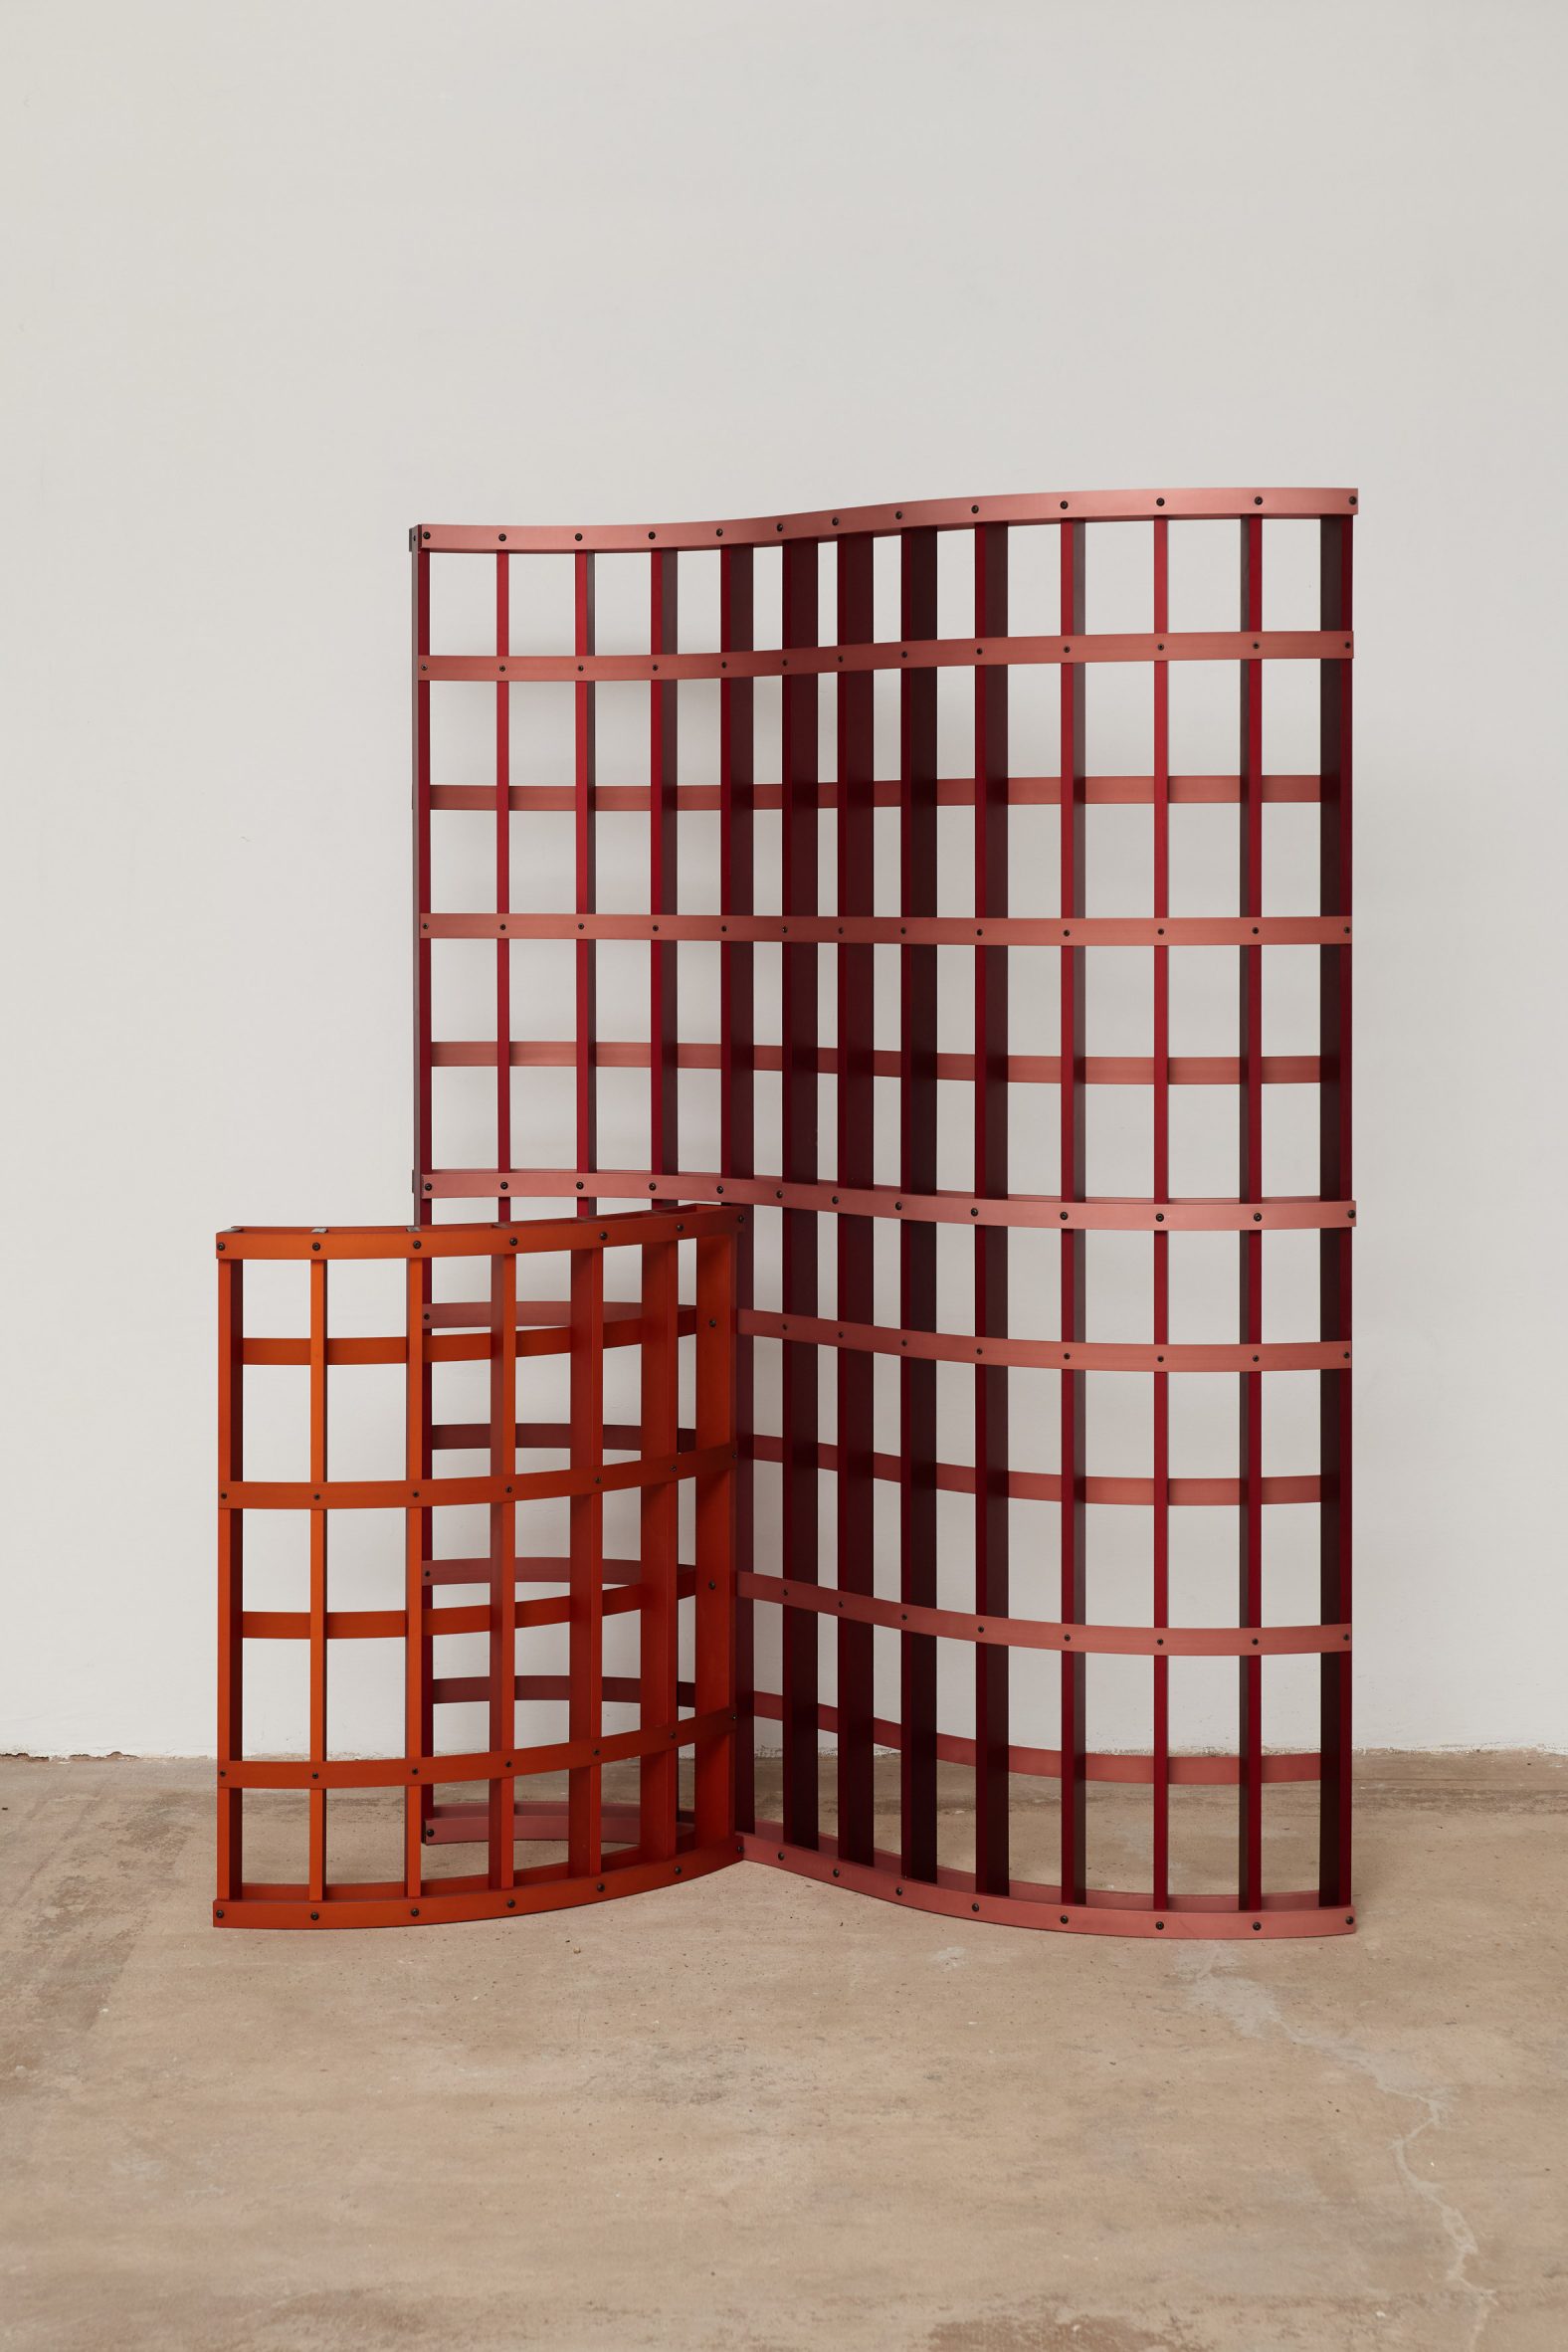 A red screen divider